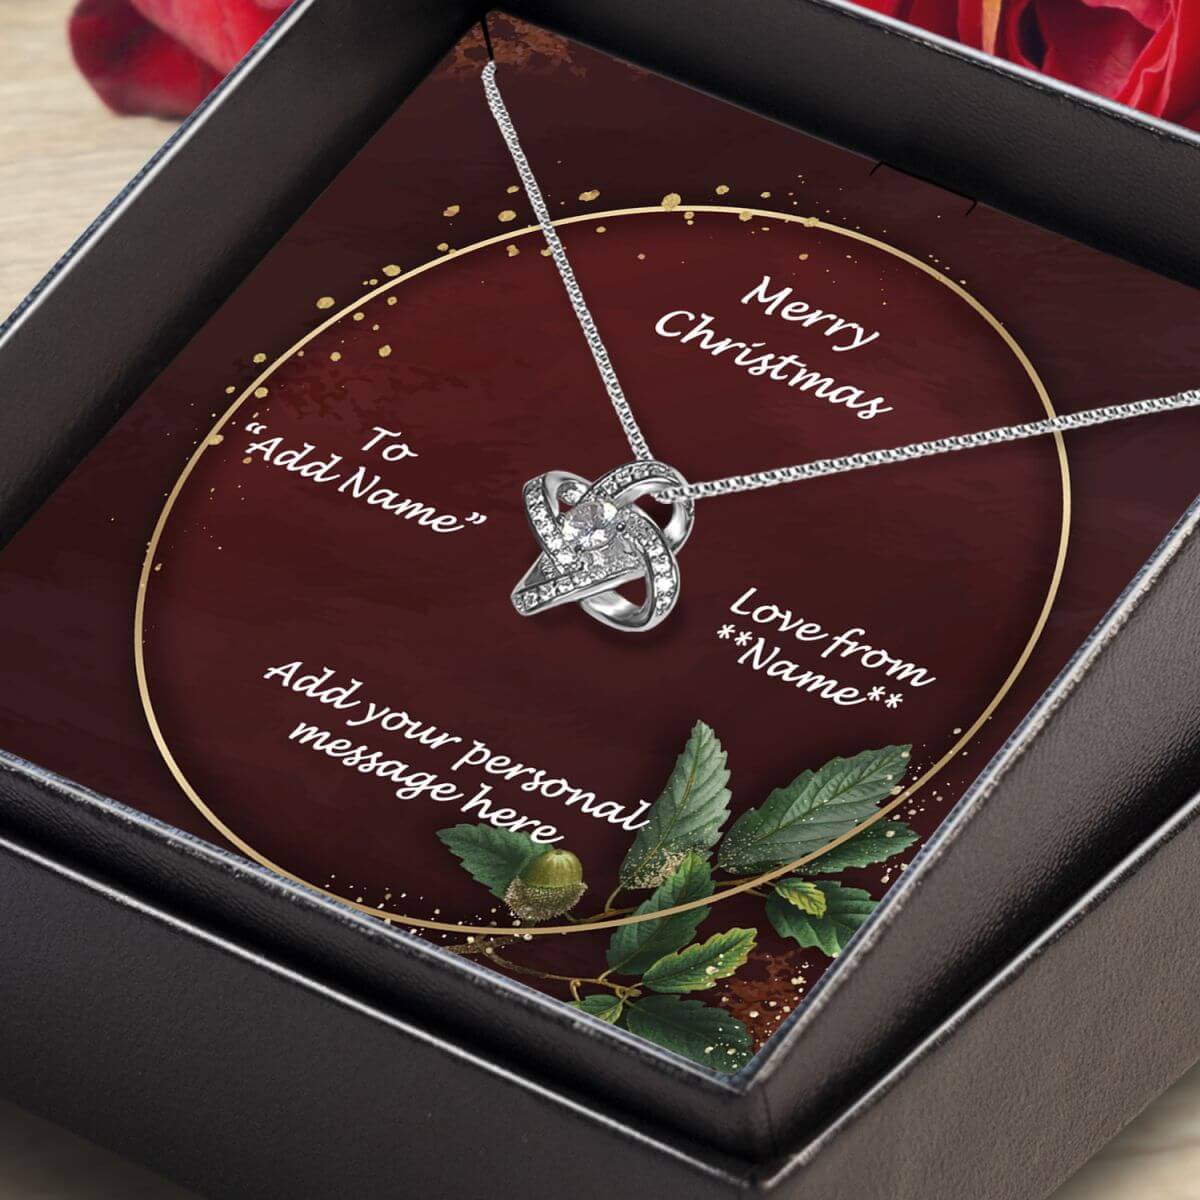 BIG-On-Jewellery-Necklace-Angled-close-up-Enduring-Love-Merry-Xmas-personal-message-1